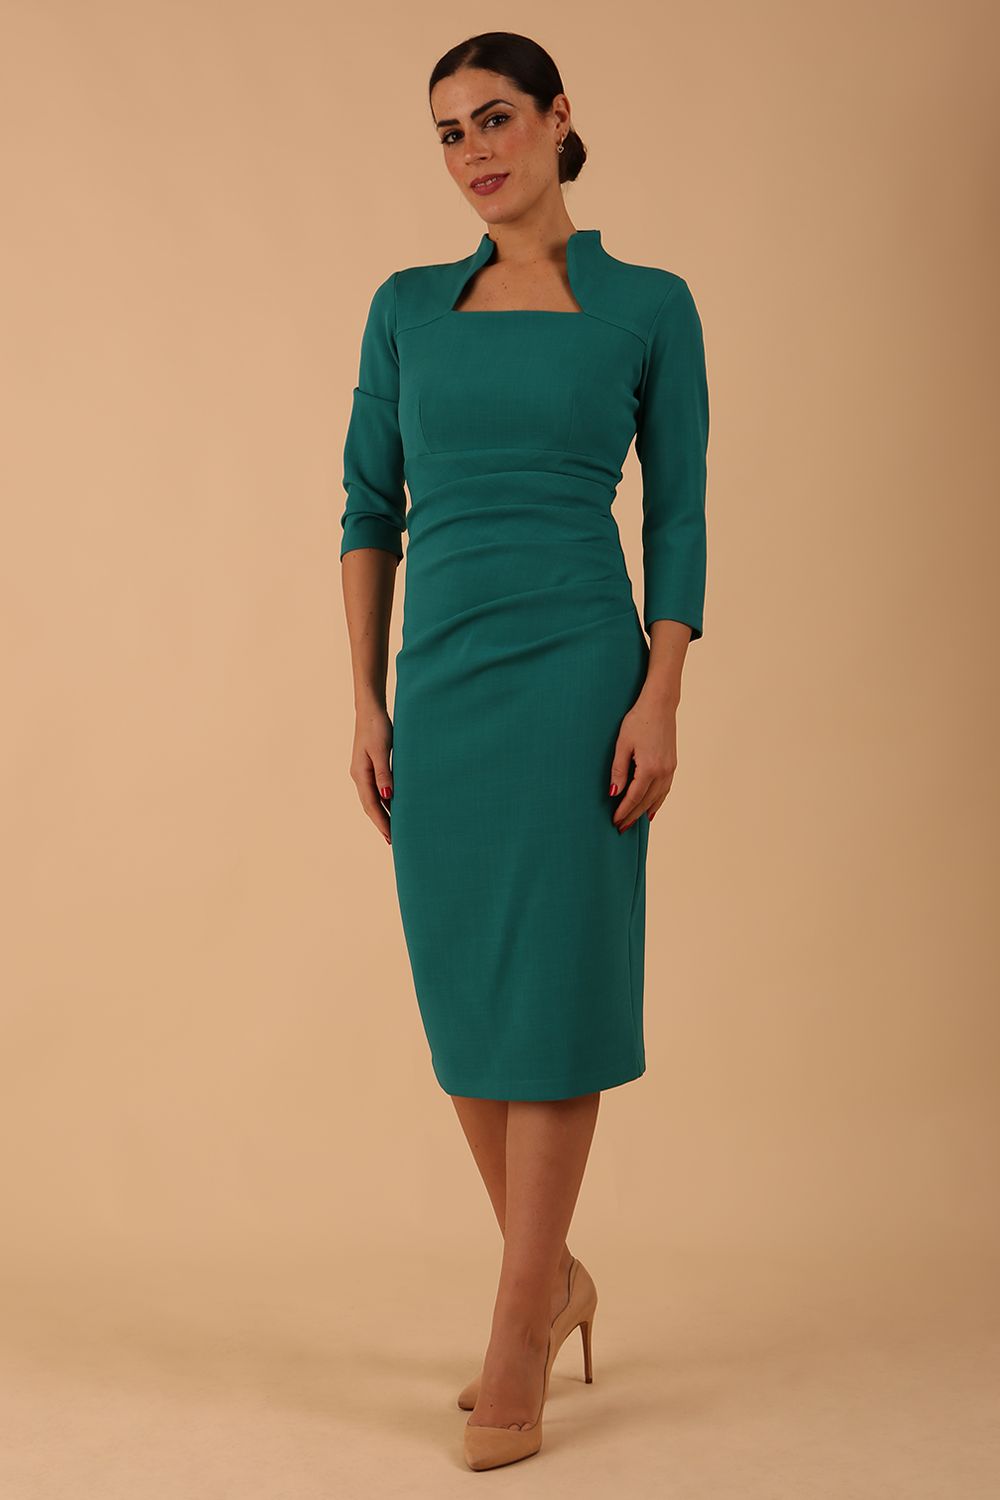 model is wearing diva catwalk plaza sheath dress with high neck Trapezium neckline cutout and three quarter sleeve pretty dress in parasailing green colour